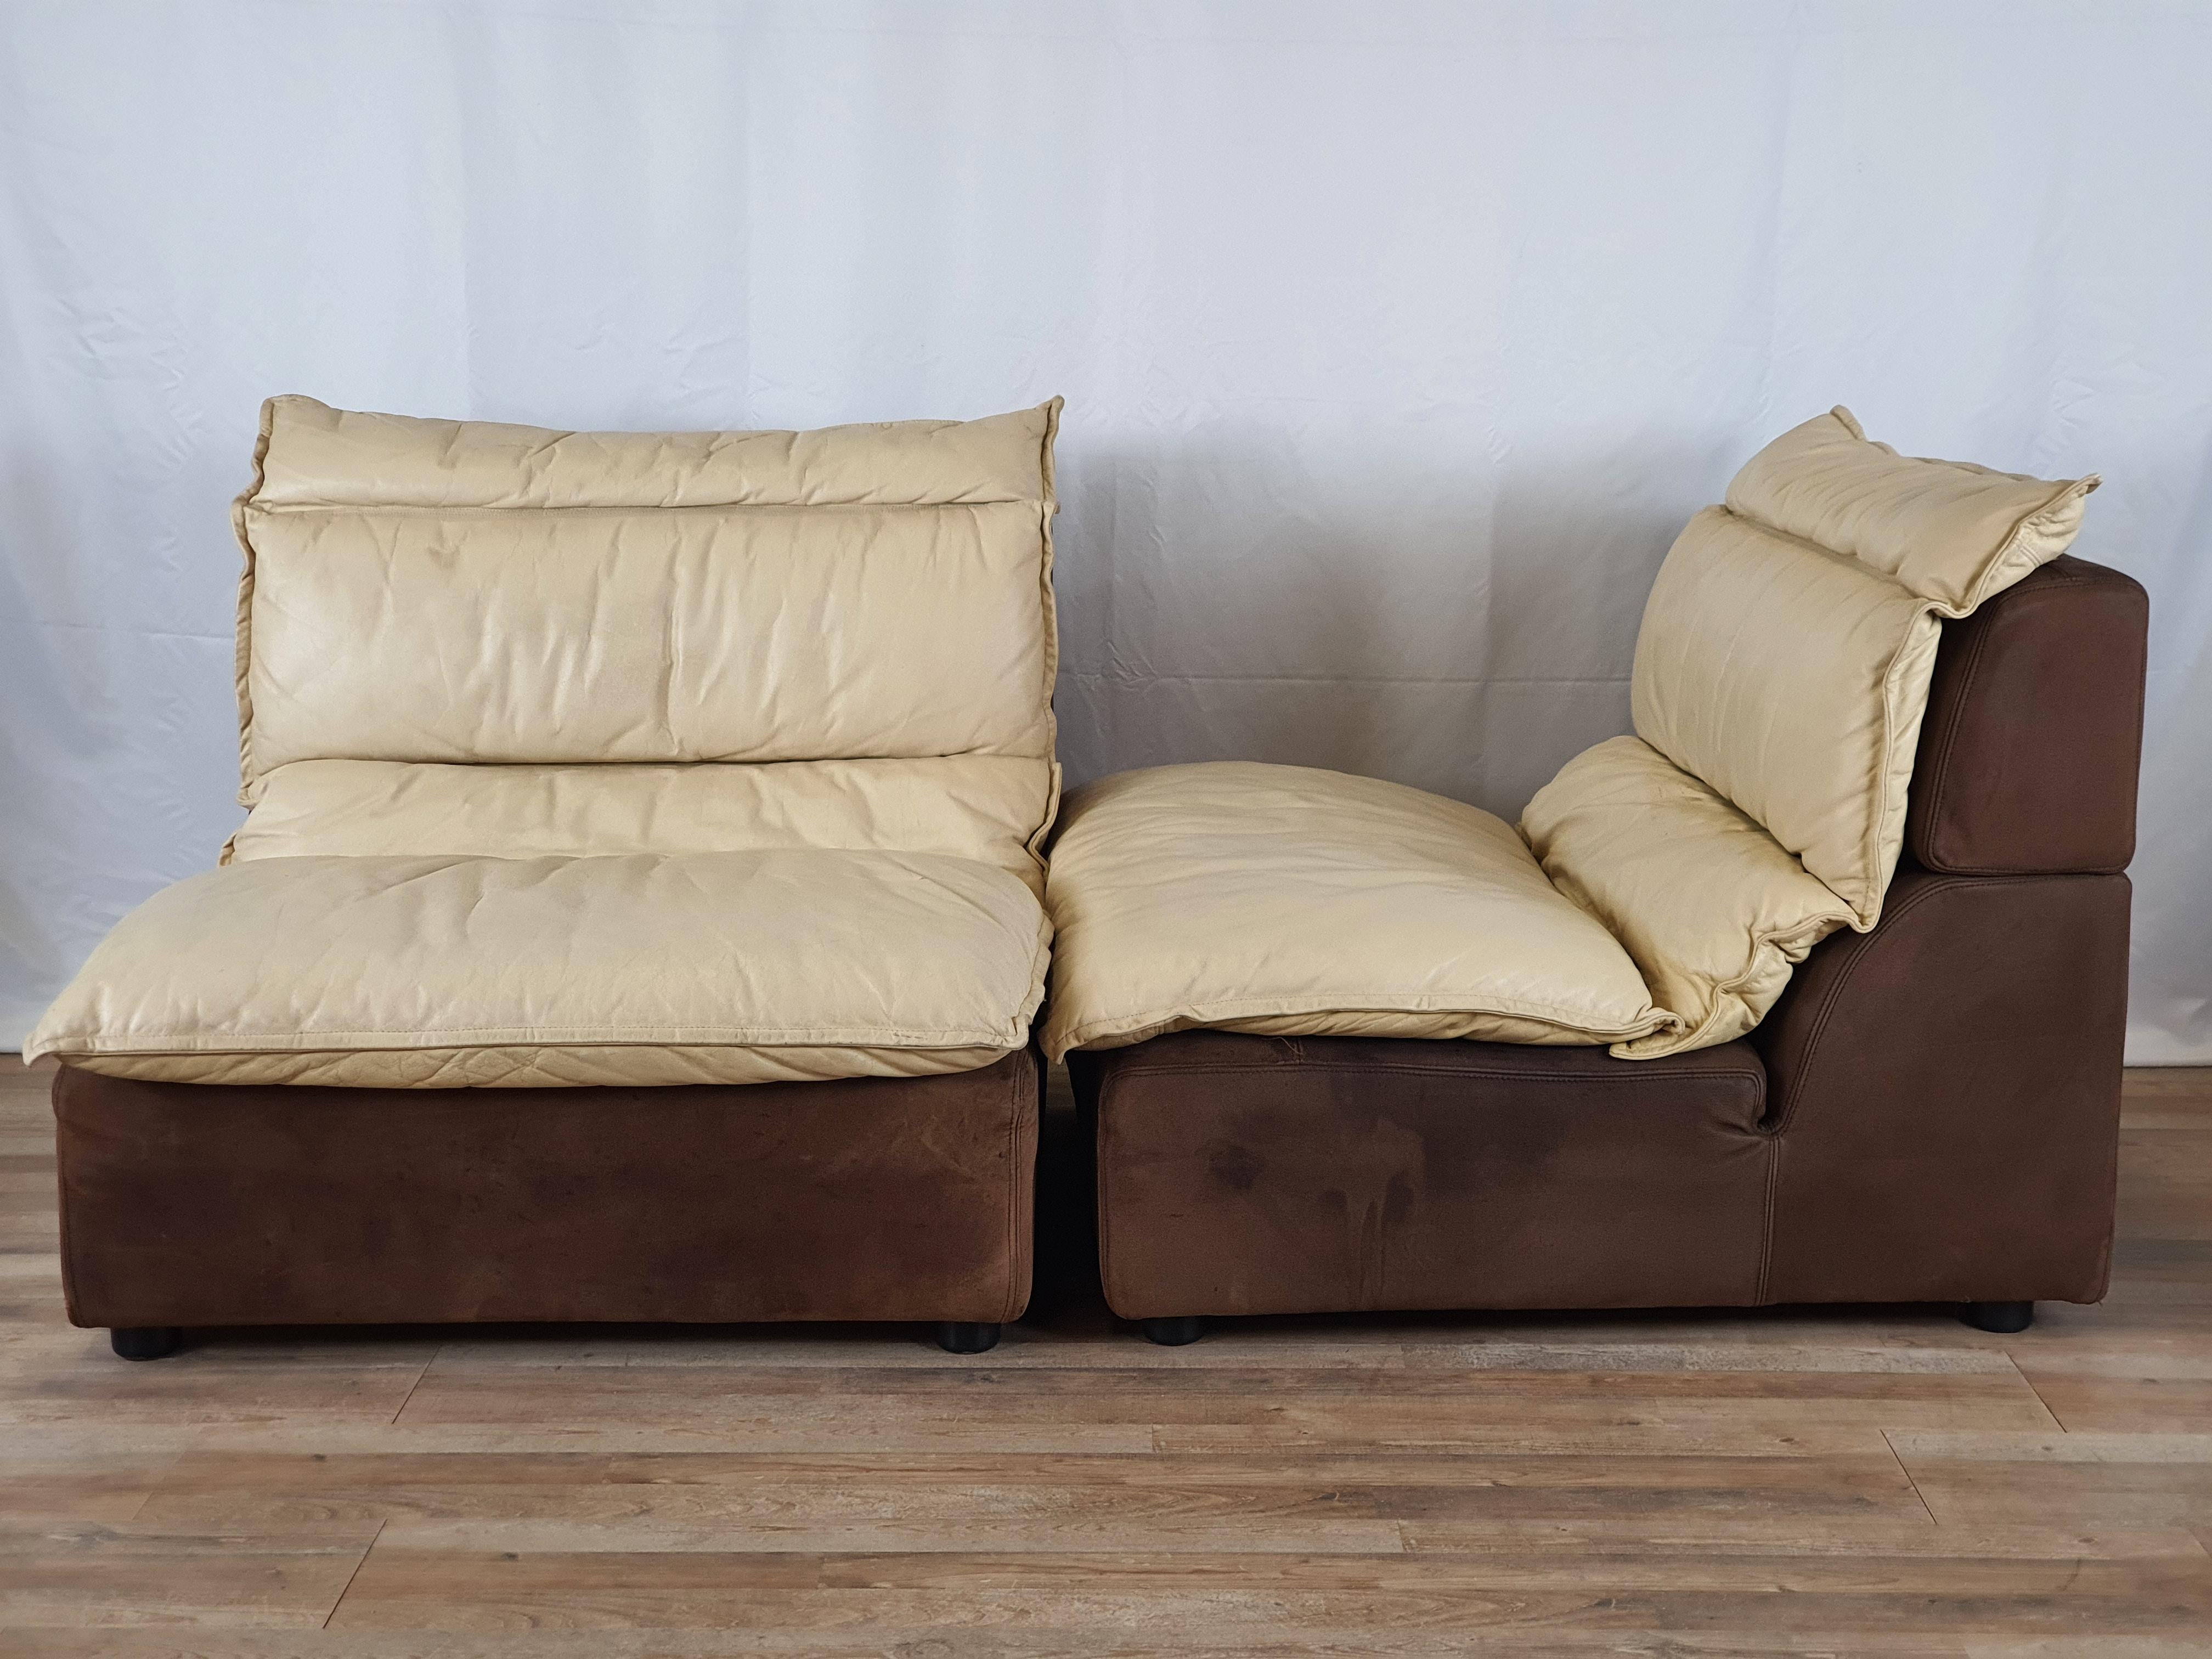 Mid-Century Modern Modular Sofa in Leather and Suede